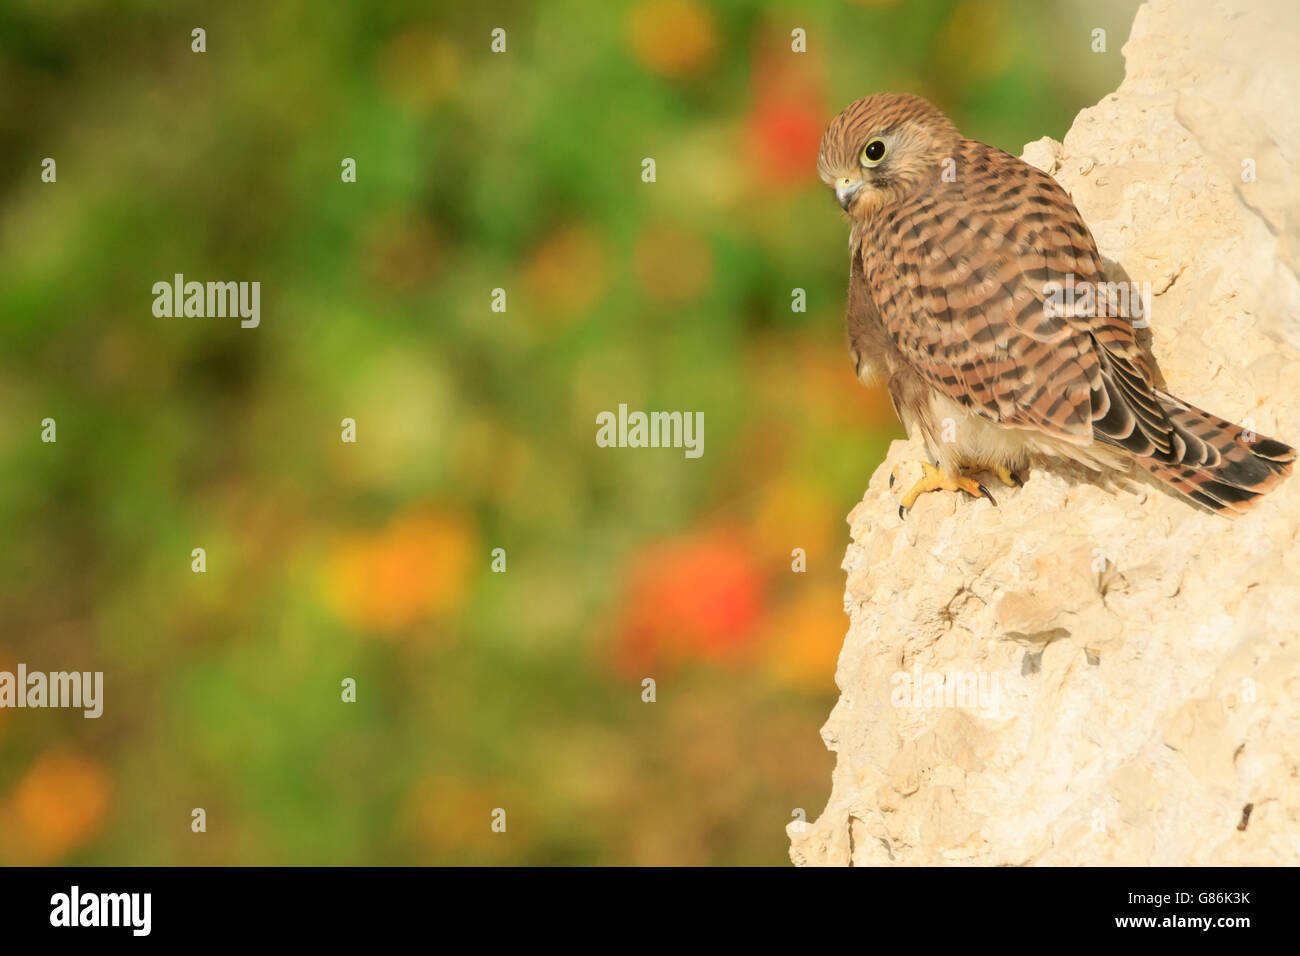 The common kestrel (Falco tinnunculus). Juvenile on rocks of the escarpment, with colors of flowers on the background eye level Stock Photo